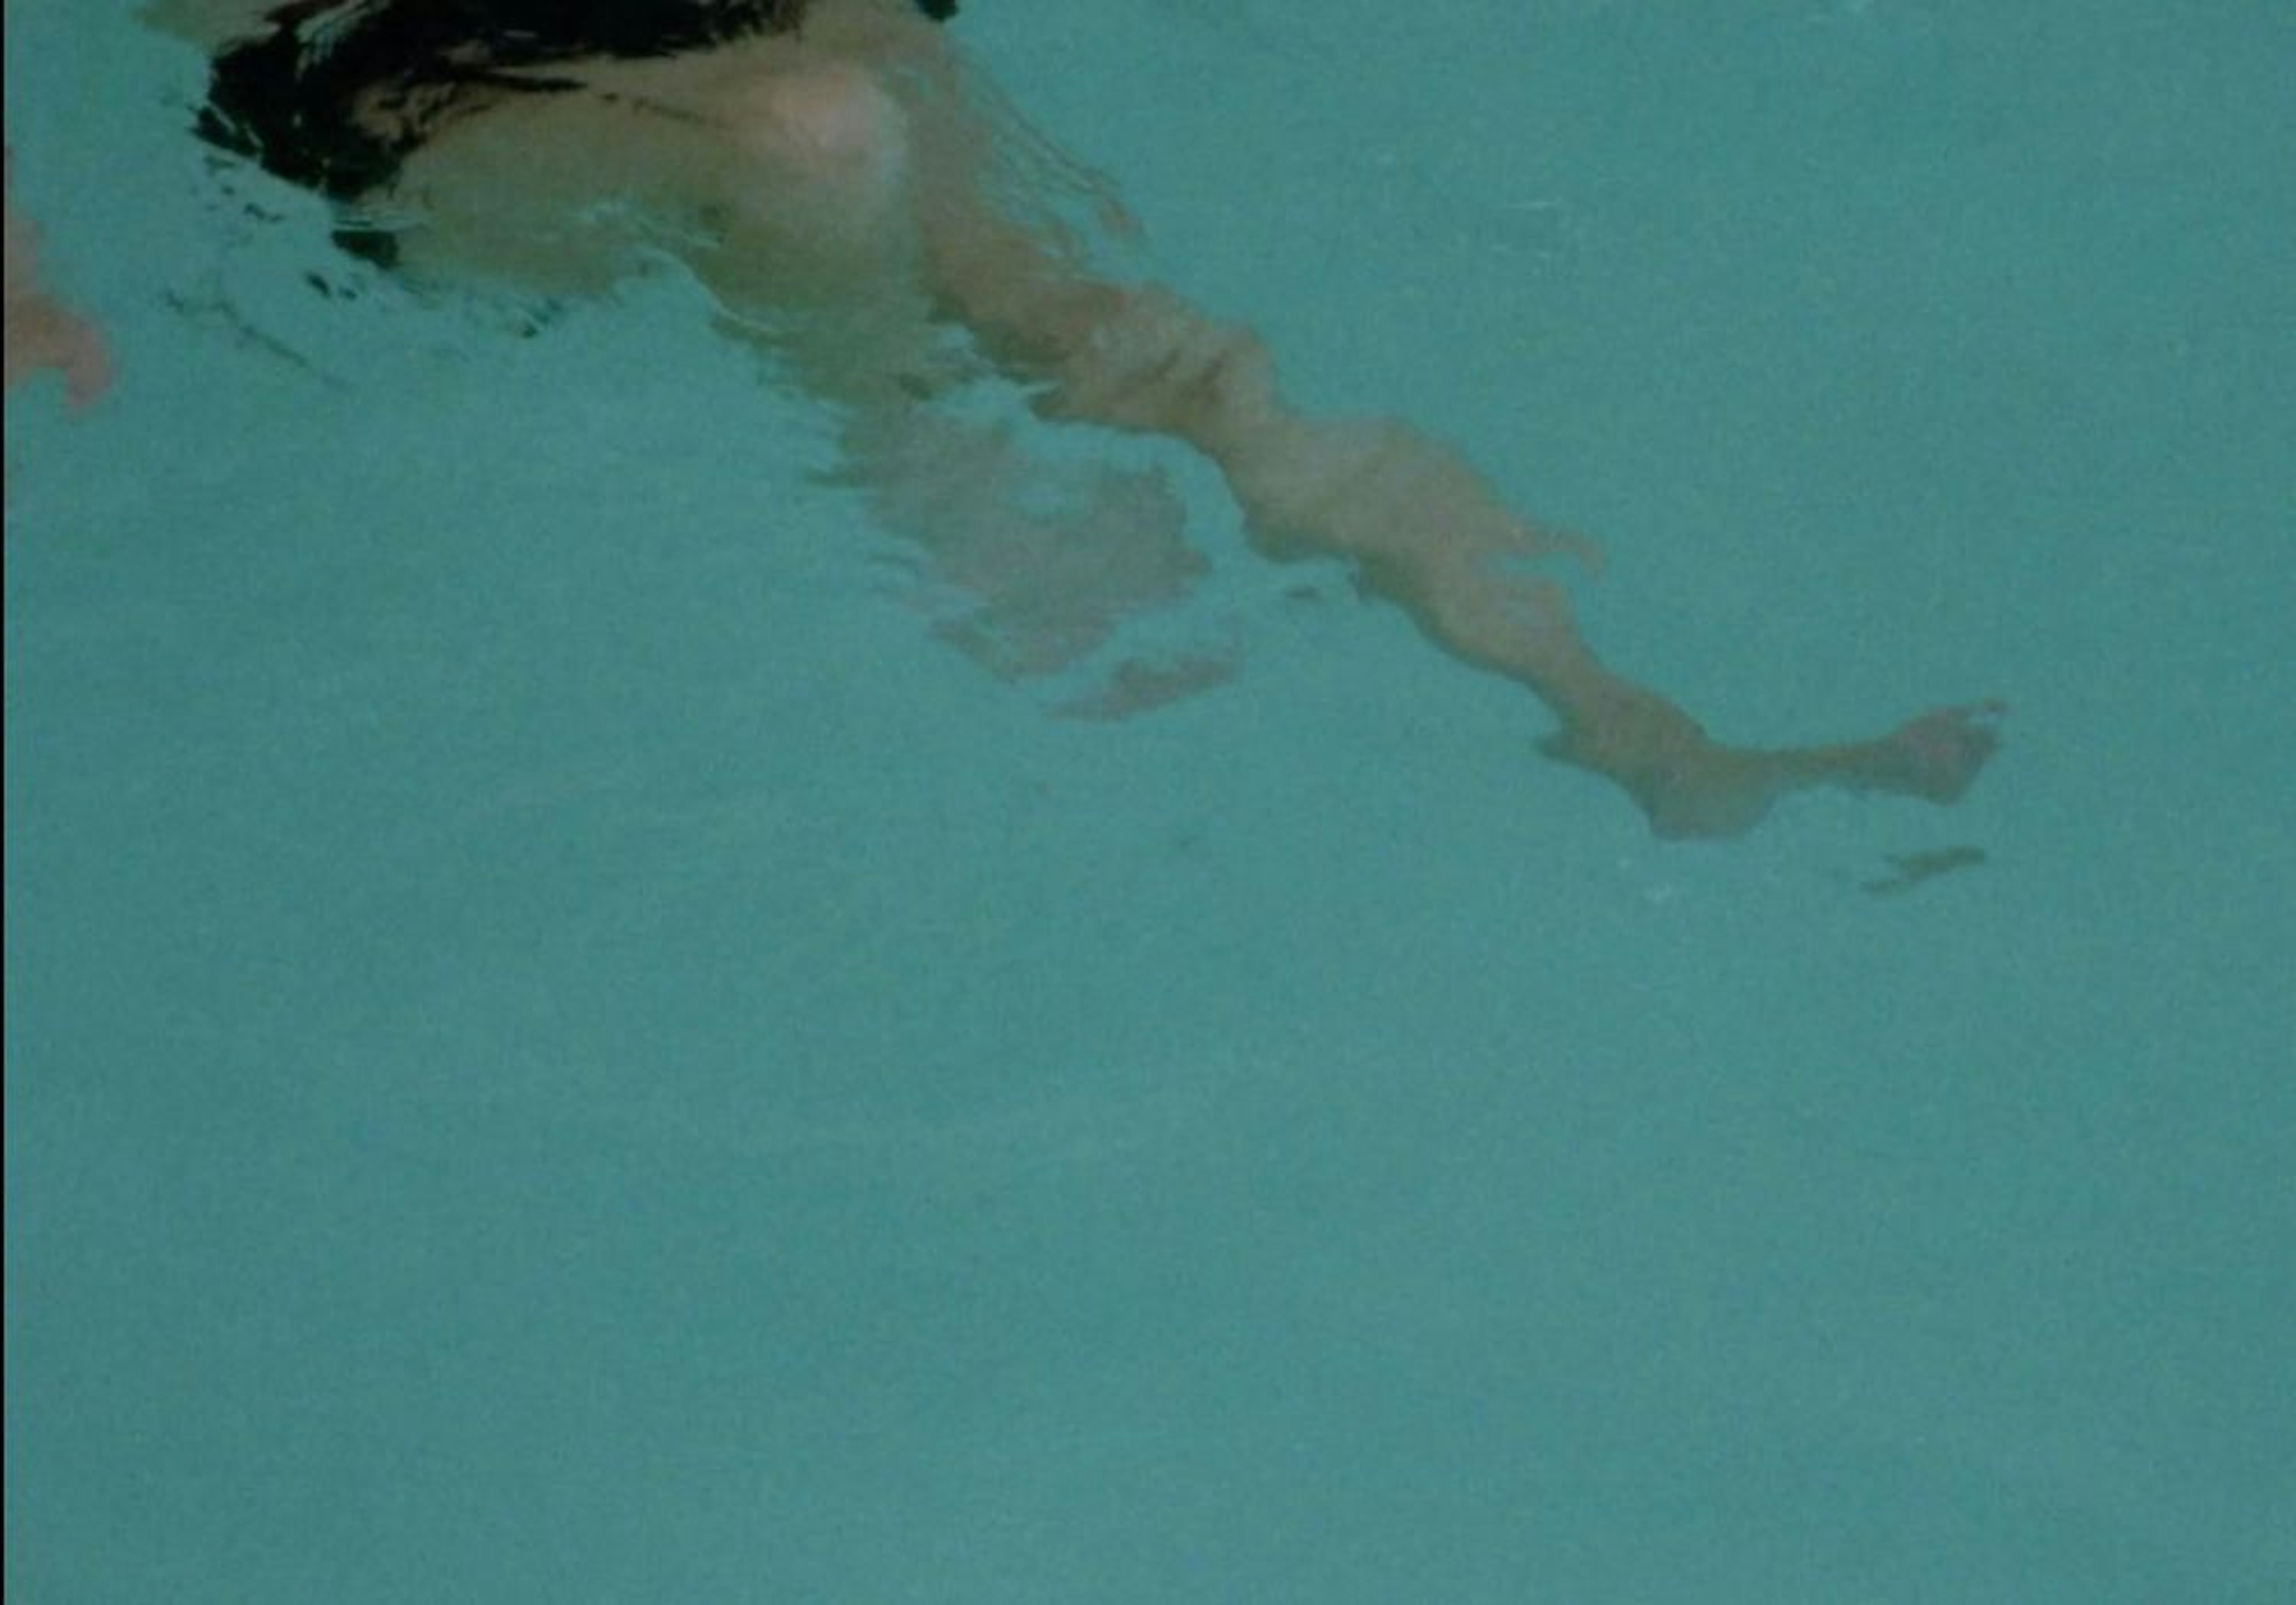 A person swimming, focusing on her legs and arms which are fragmented from the water.